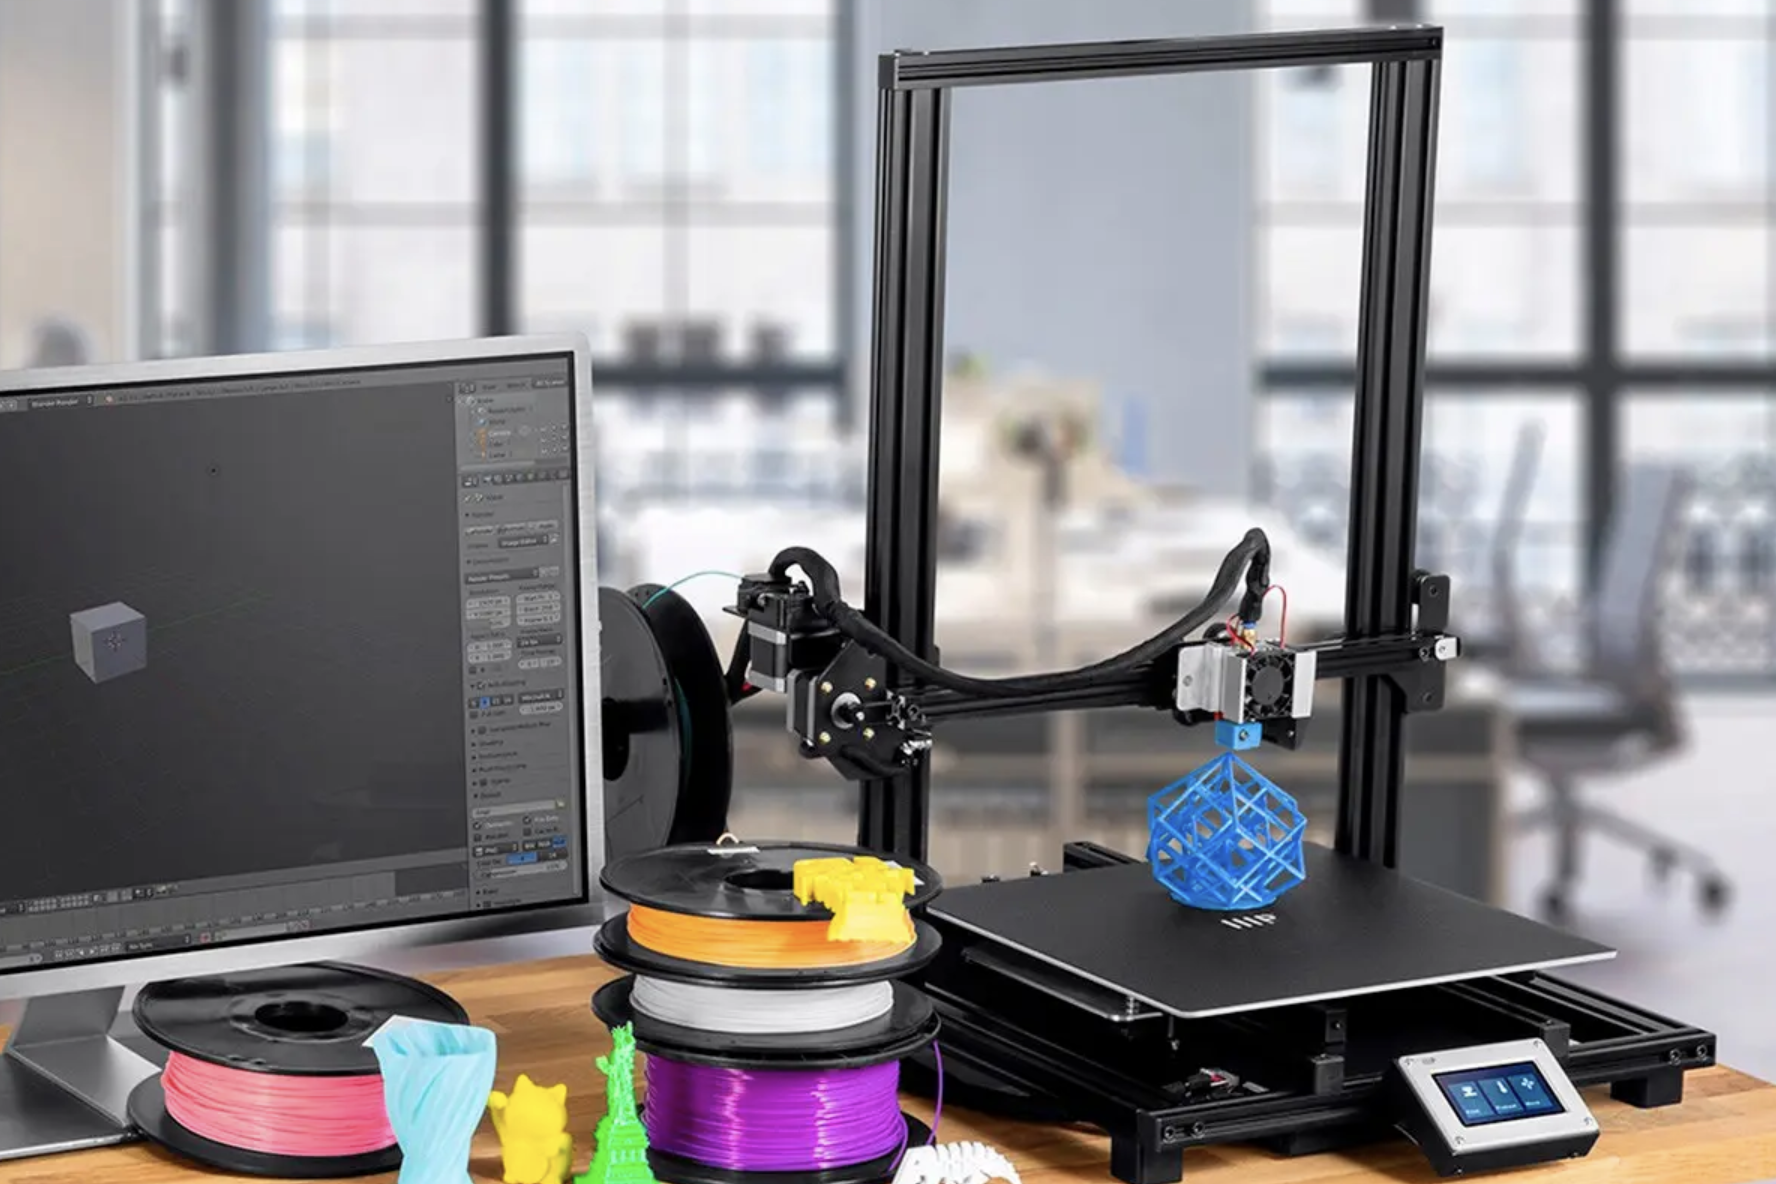 3D Printed Desk Accessories: Things to 3D Print for Your Desk